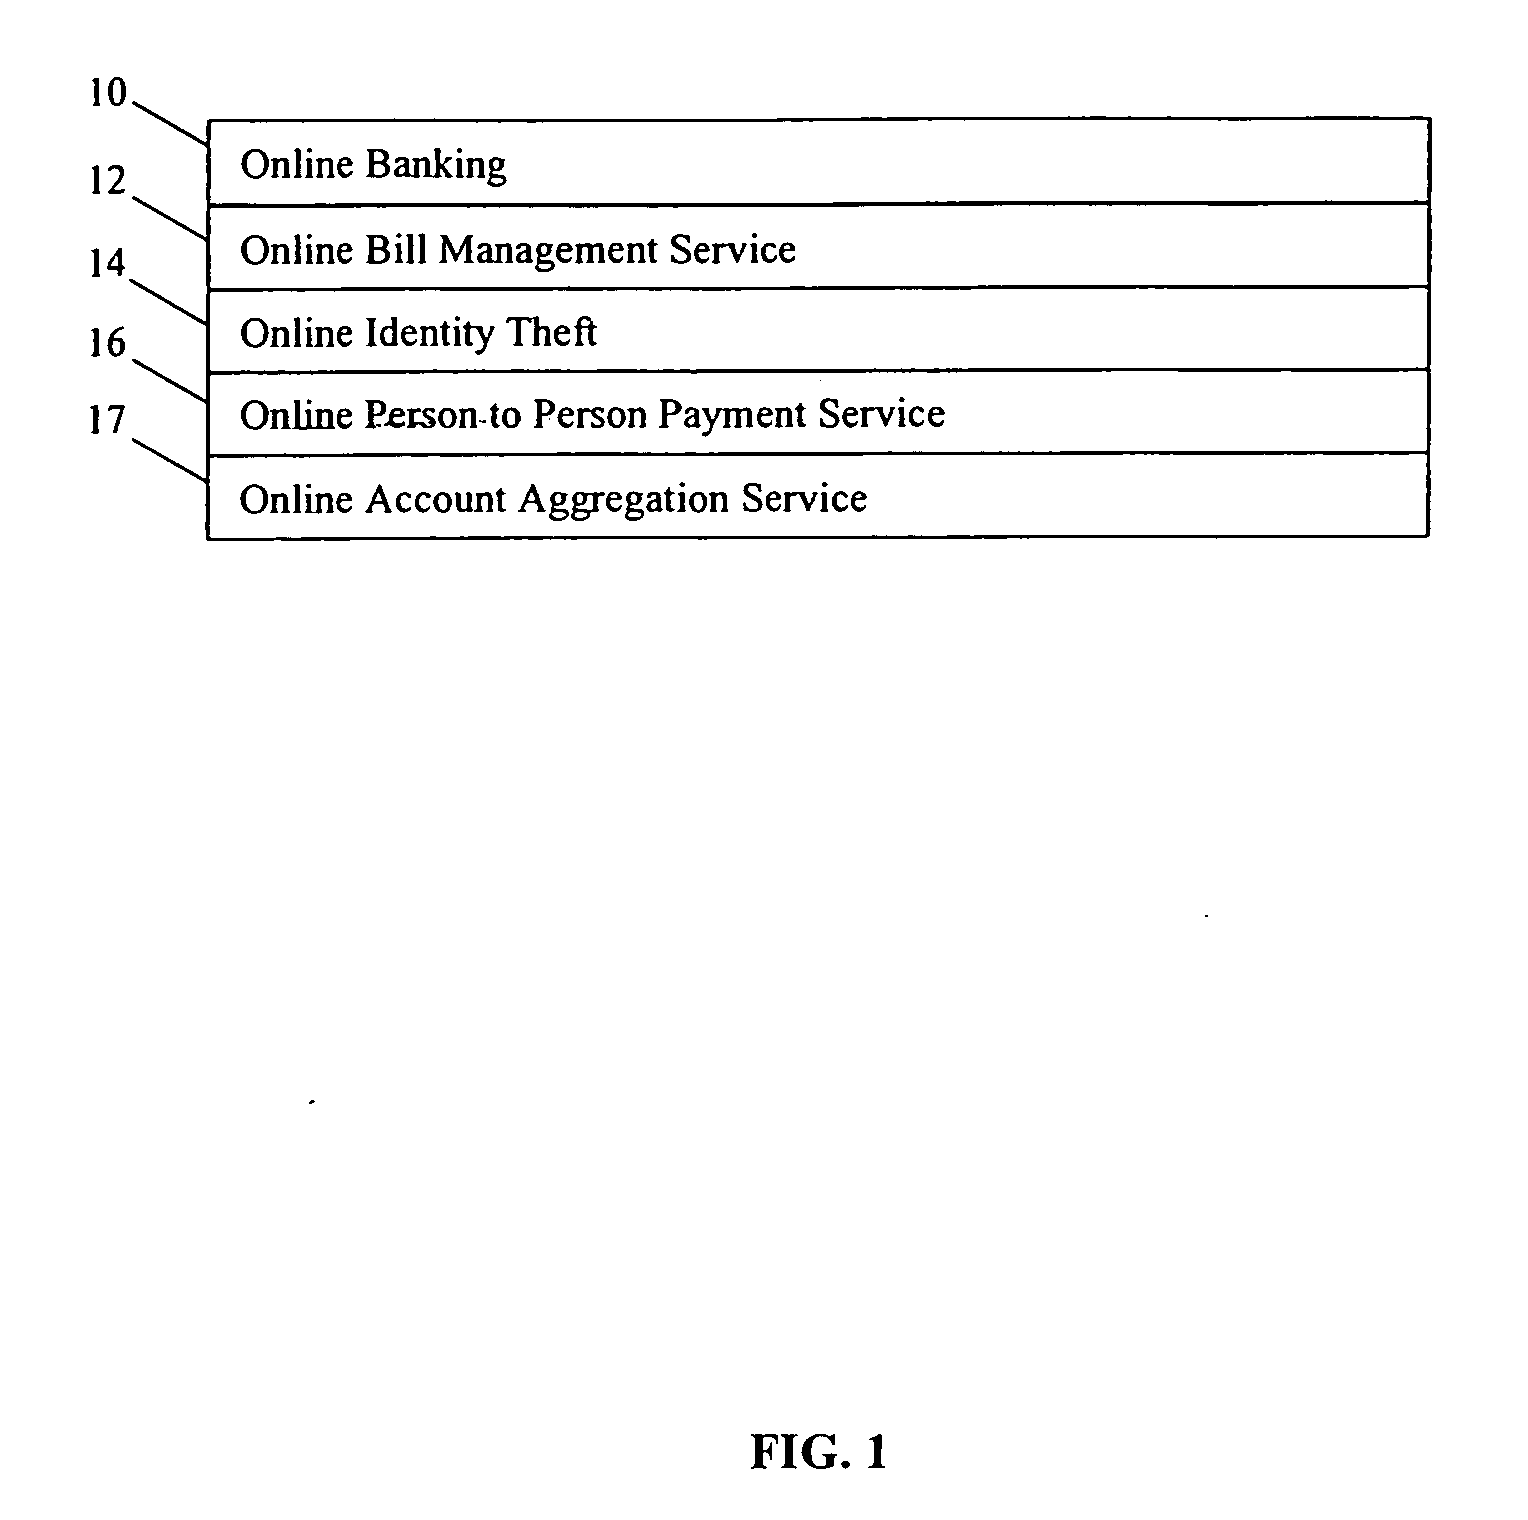 Method and system for insuring against loss in connection with an online financial transaction